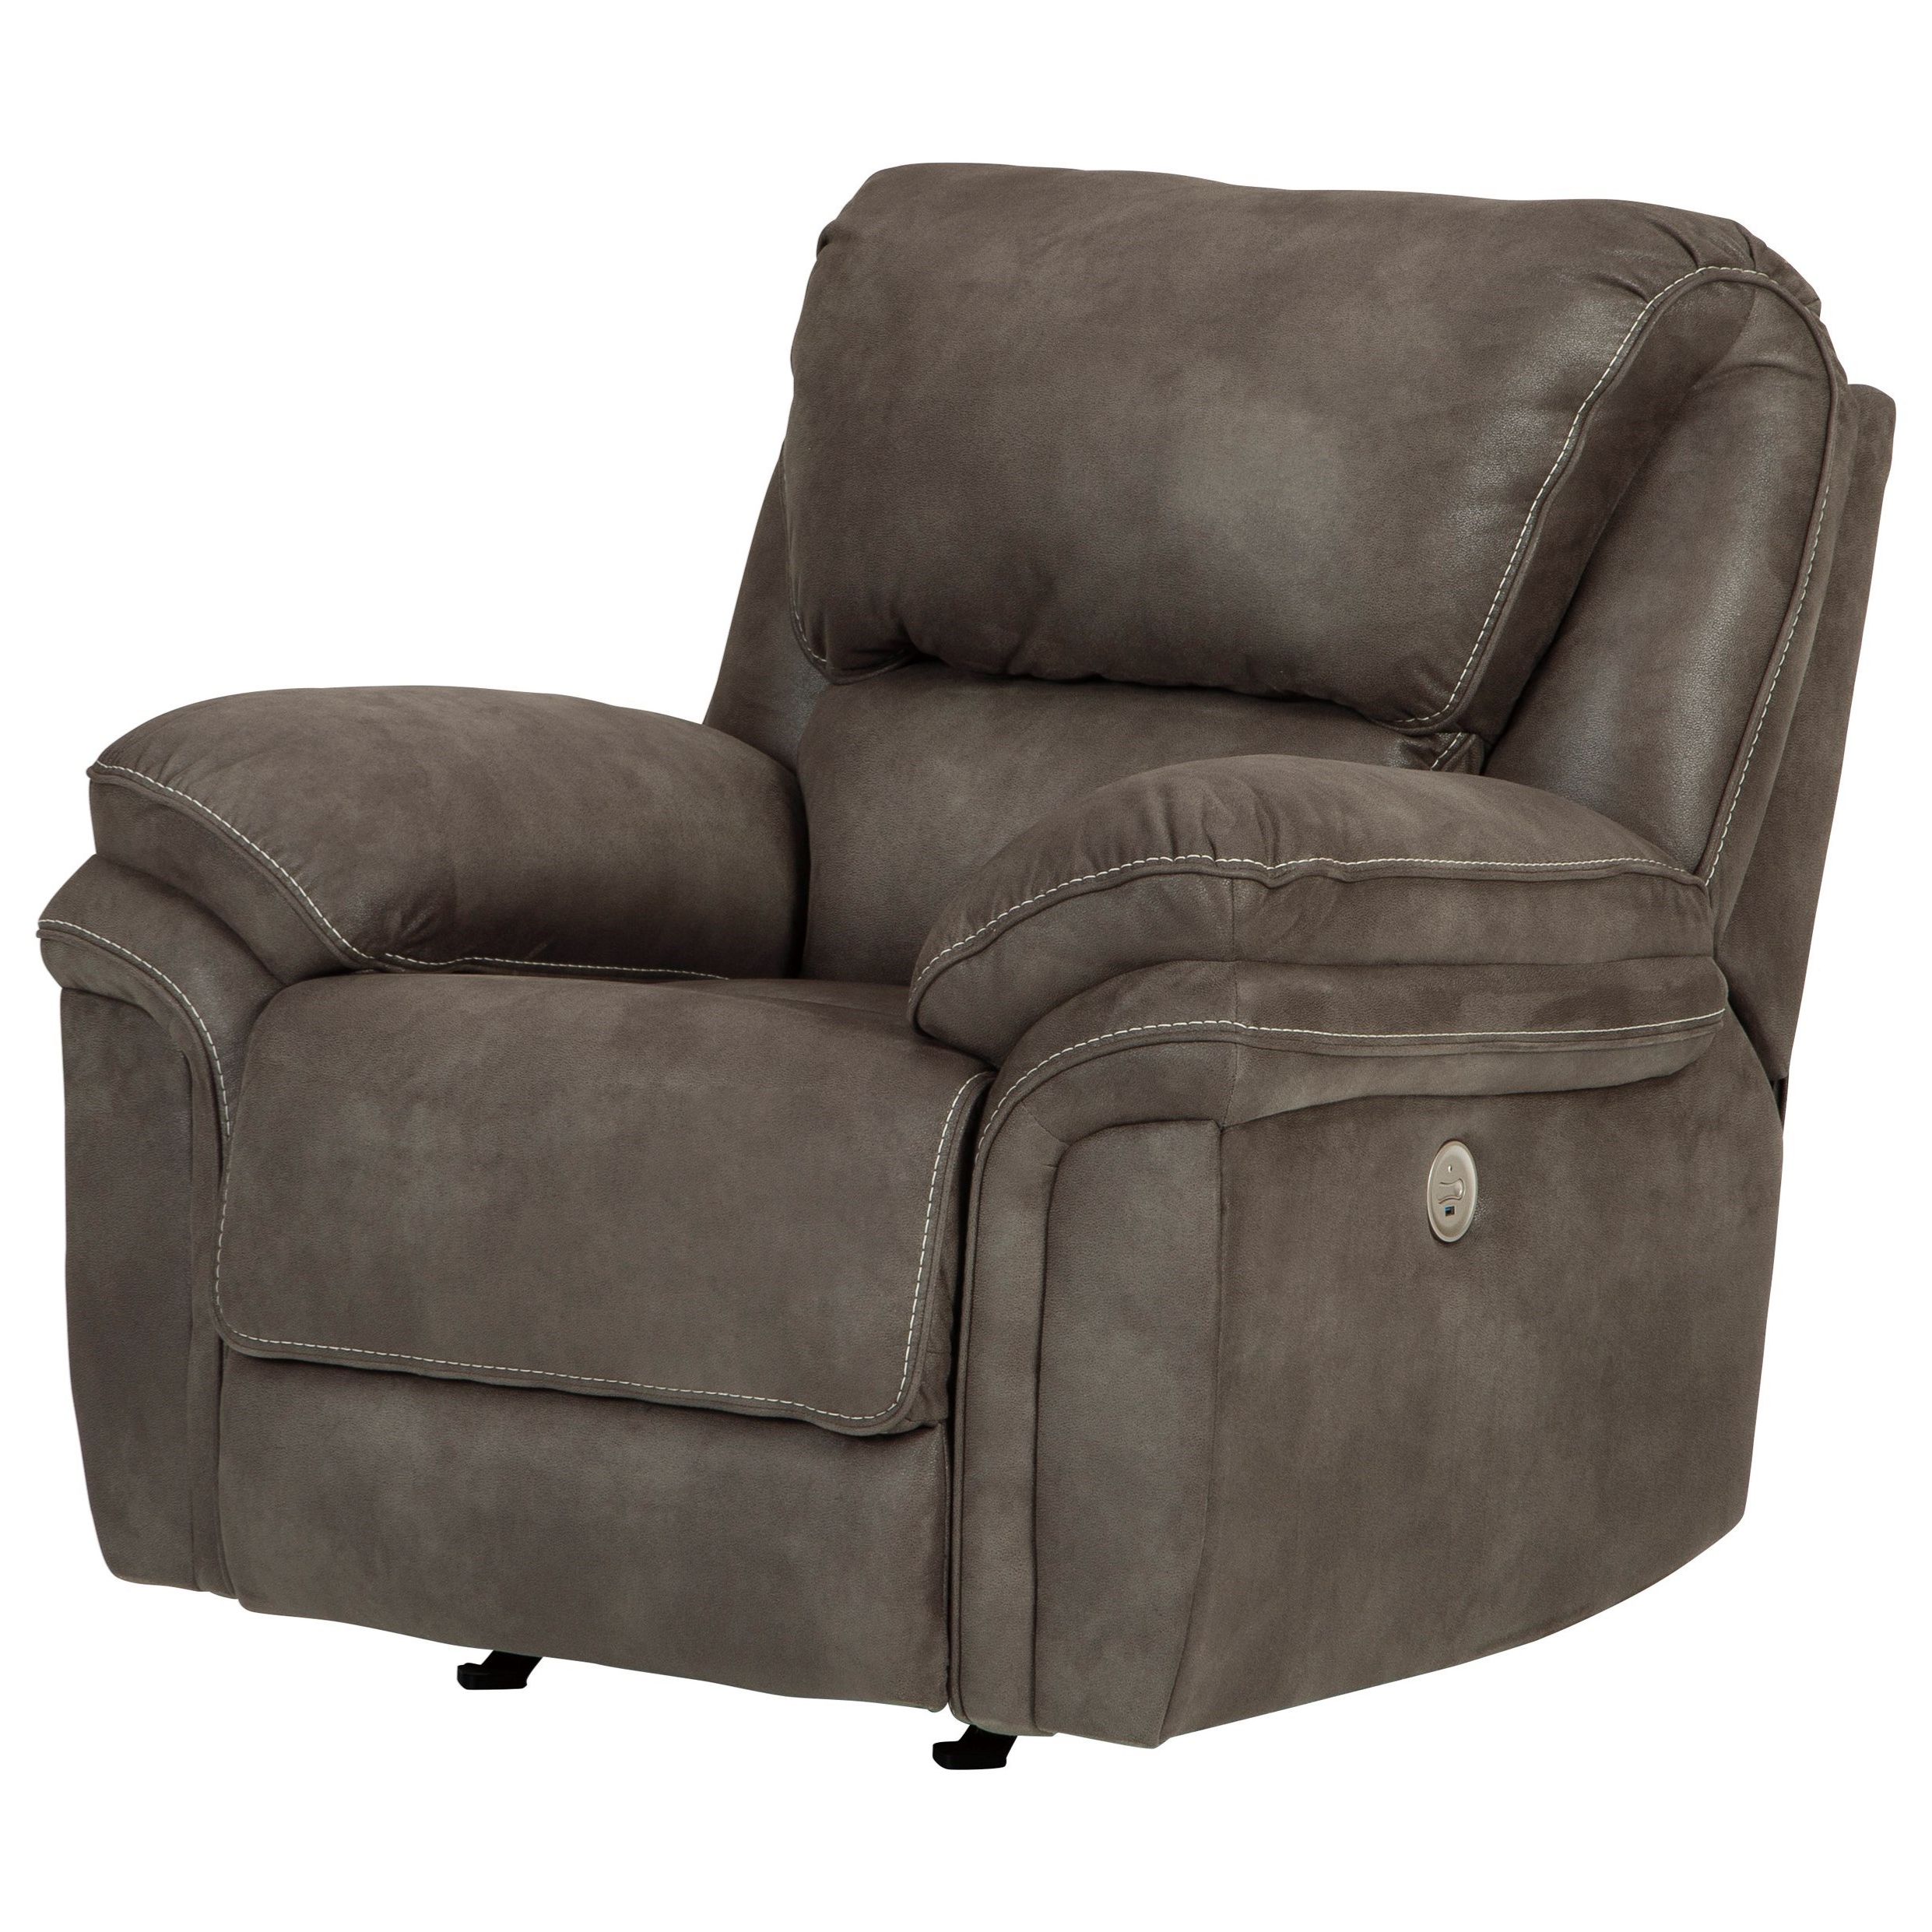 Faux Leather Ac And Usb Charging Ottomans Pertaining To Well Known Benchcraft Trementon Faux Suede Power Rocker Recliner W/ Usb Charging (View 2 of 10)